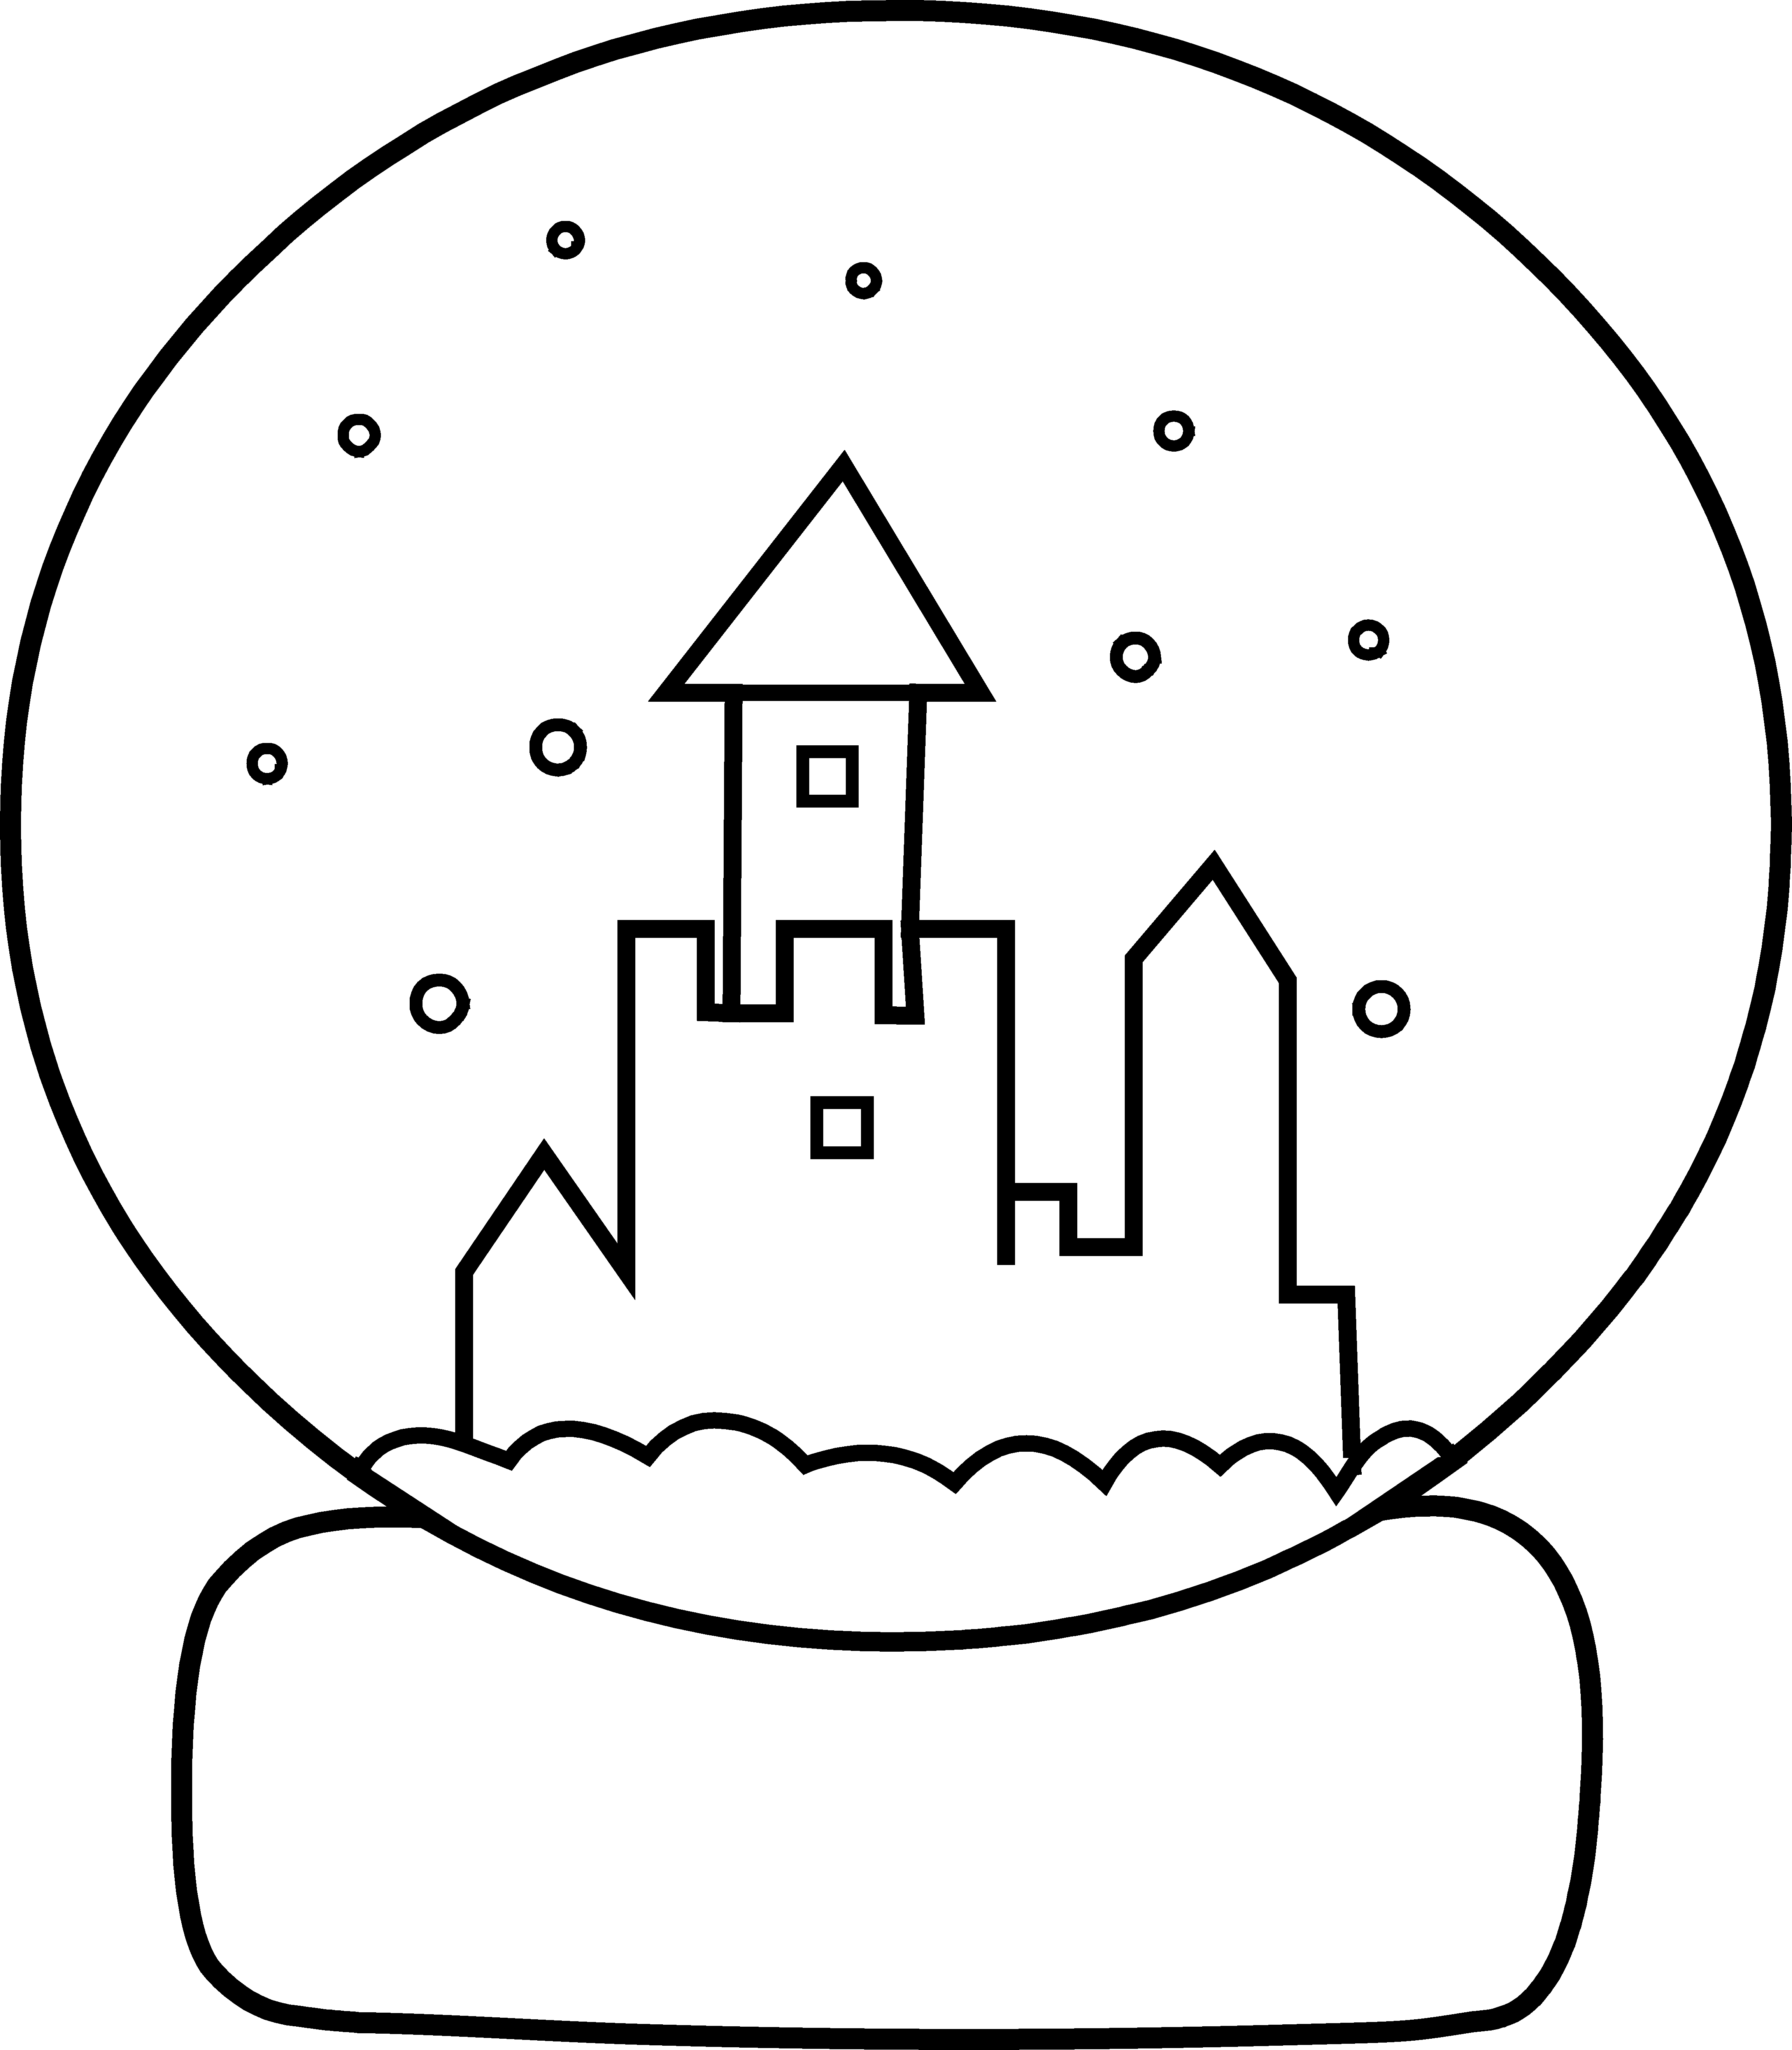 11 Pics of Coloring Pages Snow Globe - Winter Snow Globe Coloring ...